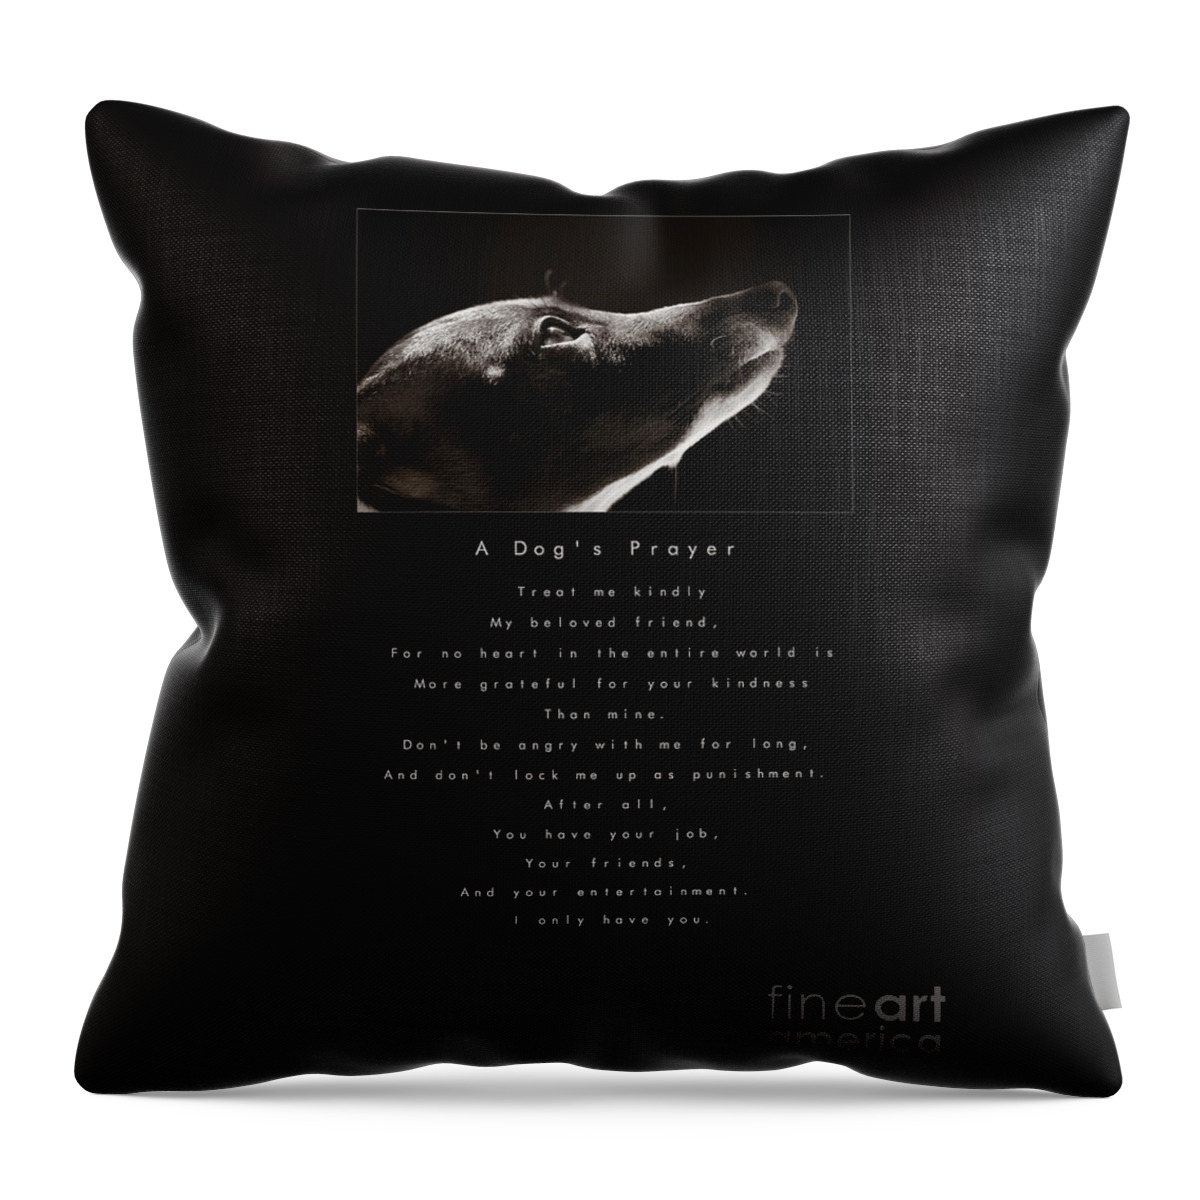 A Dogs Prayer Throw Pillow featuring the photograph A Dog's Prayer A Popular Inspirational Portrait and Poem Featuring an Italian Greyhound Rescue by Angela Rath